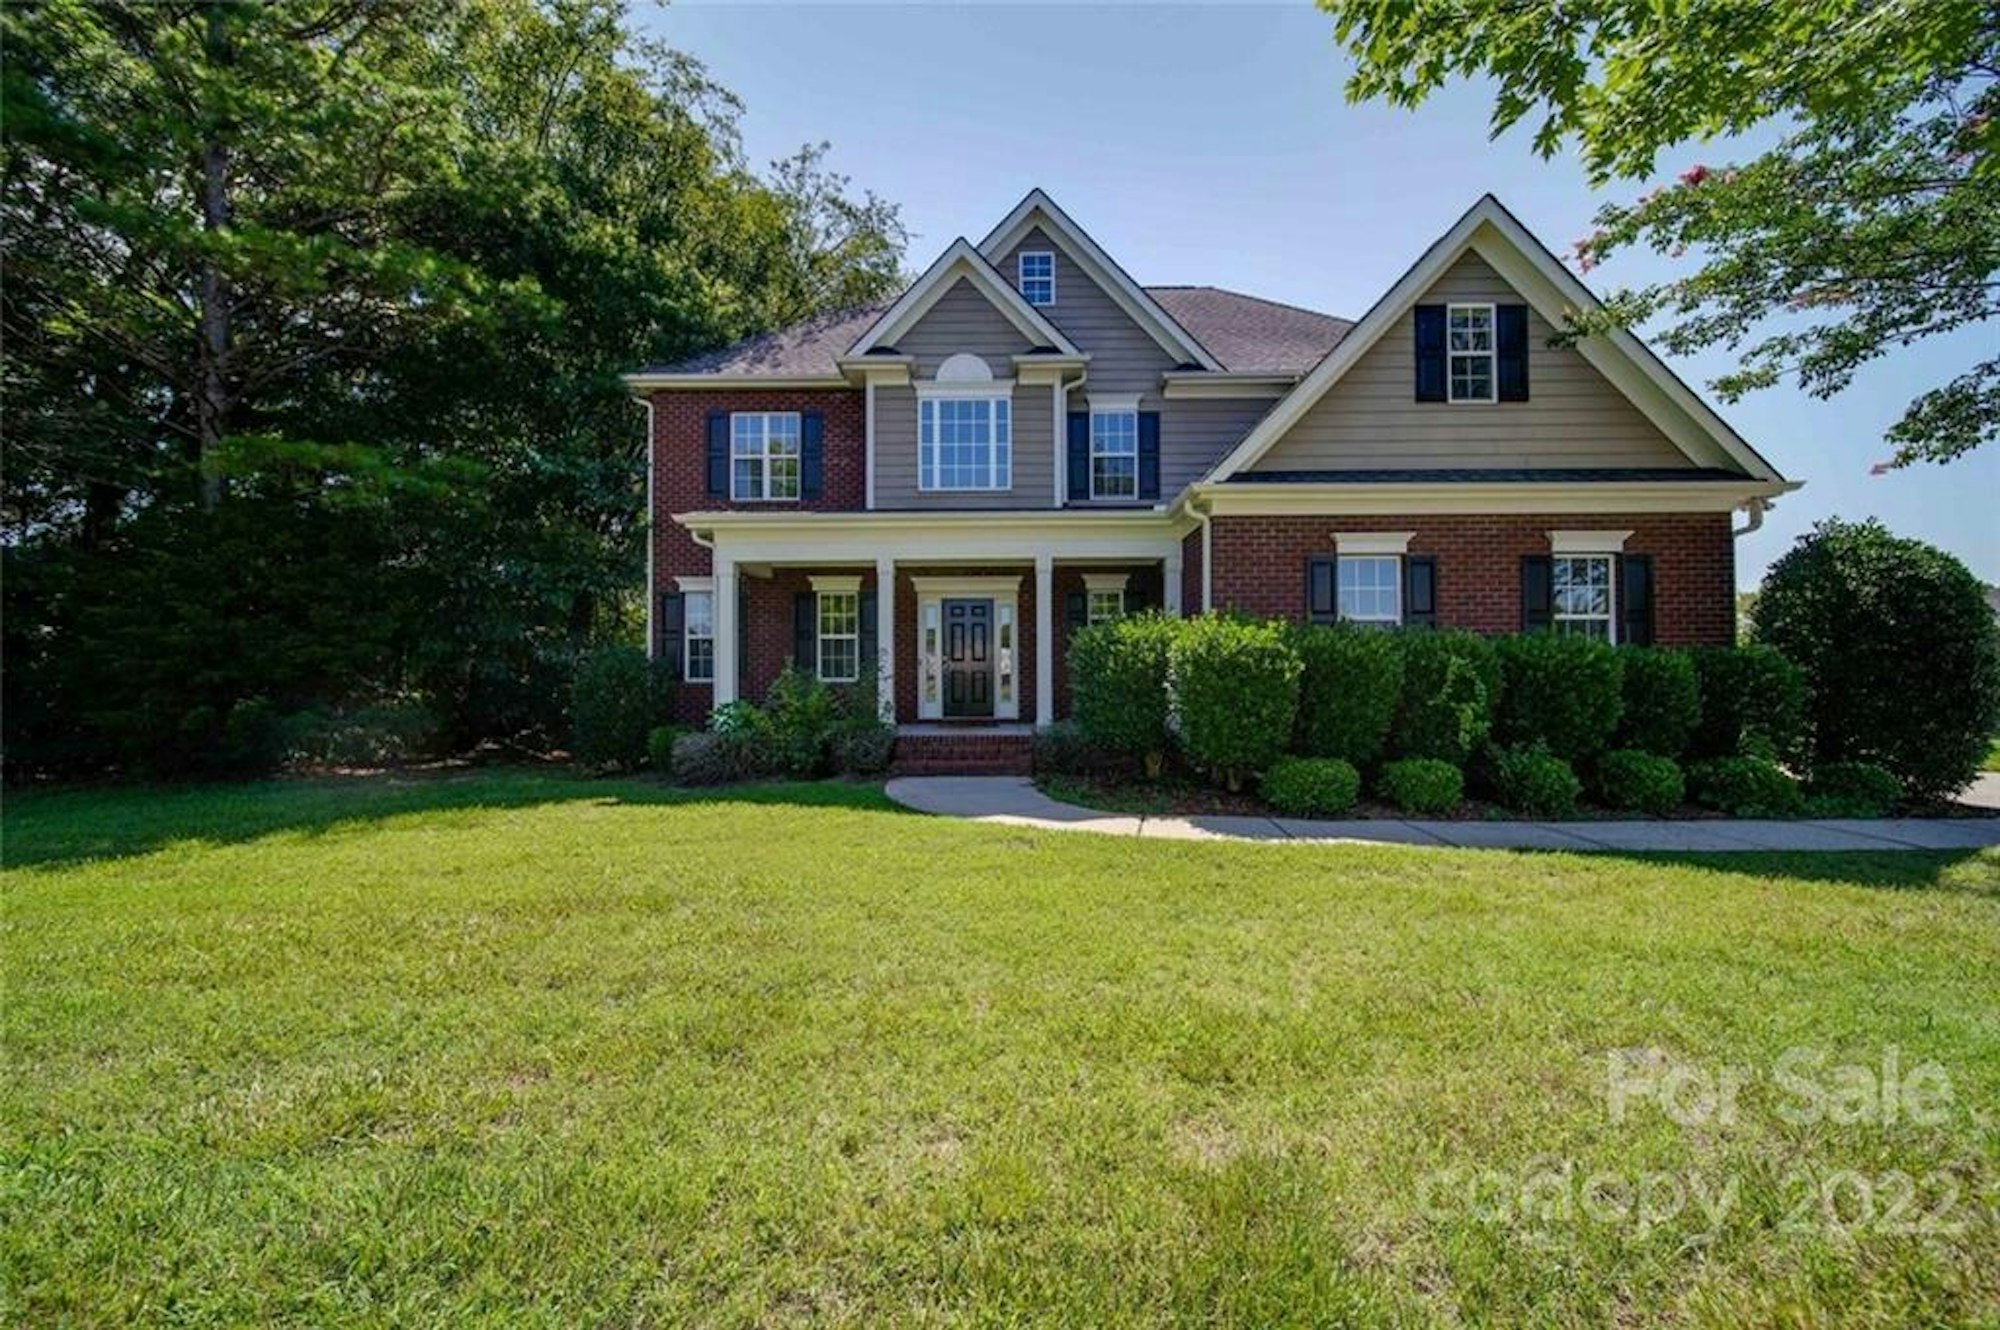 Photo 1 of 40 - 108 N Gibbs Rd, Mooresville, NC 28117